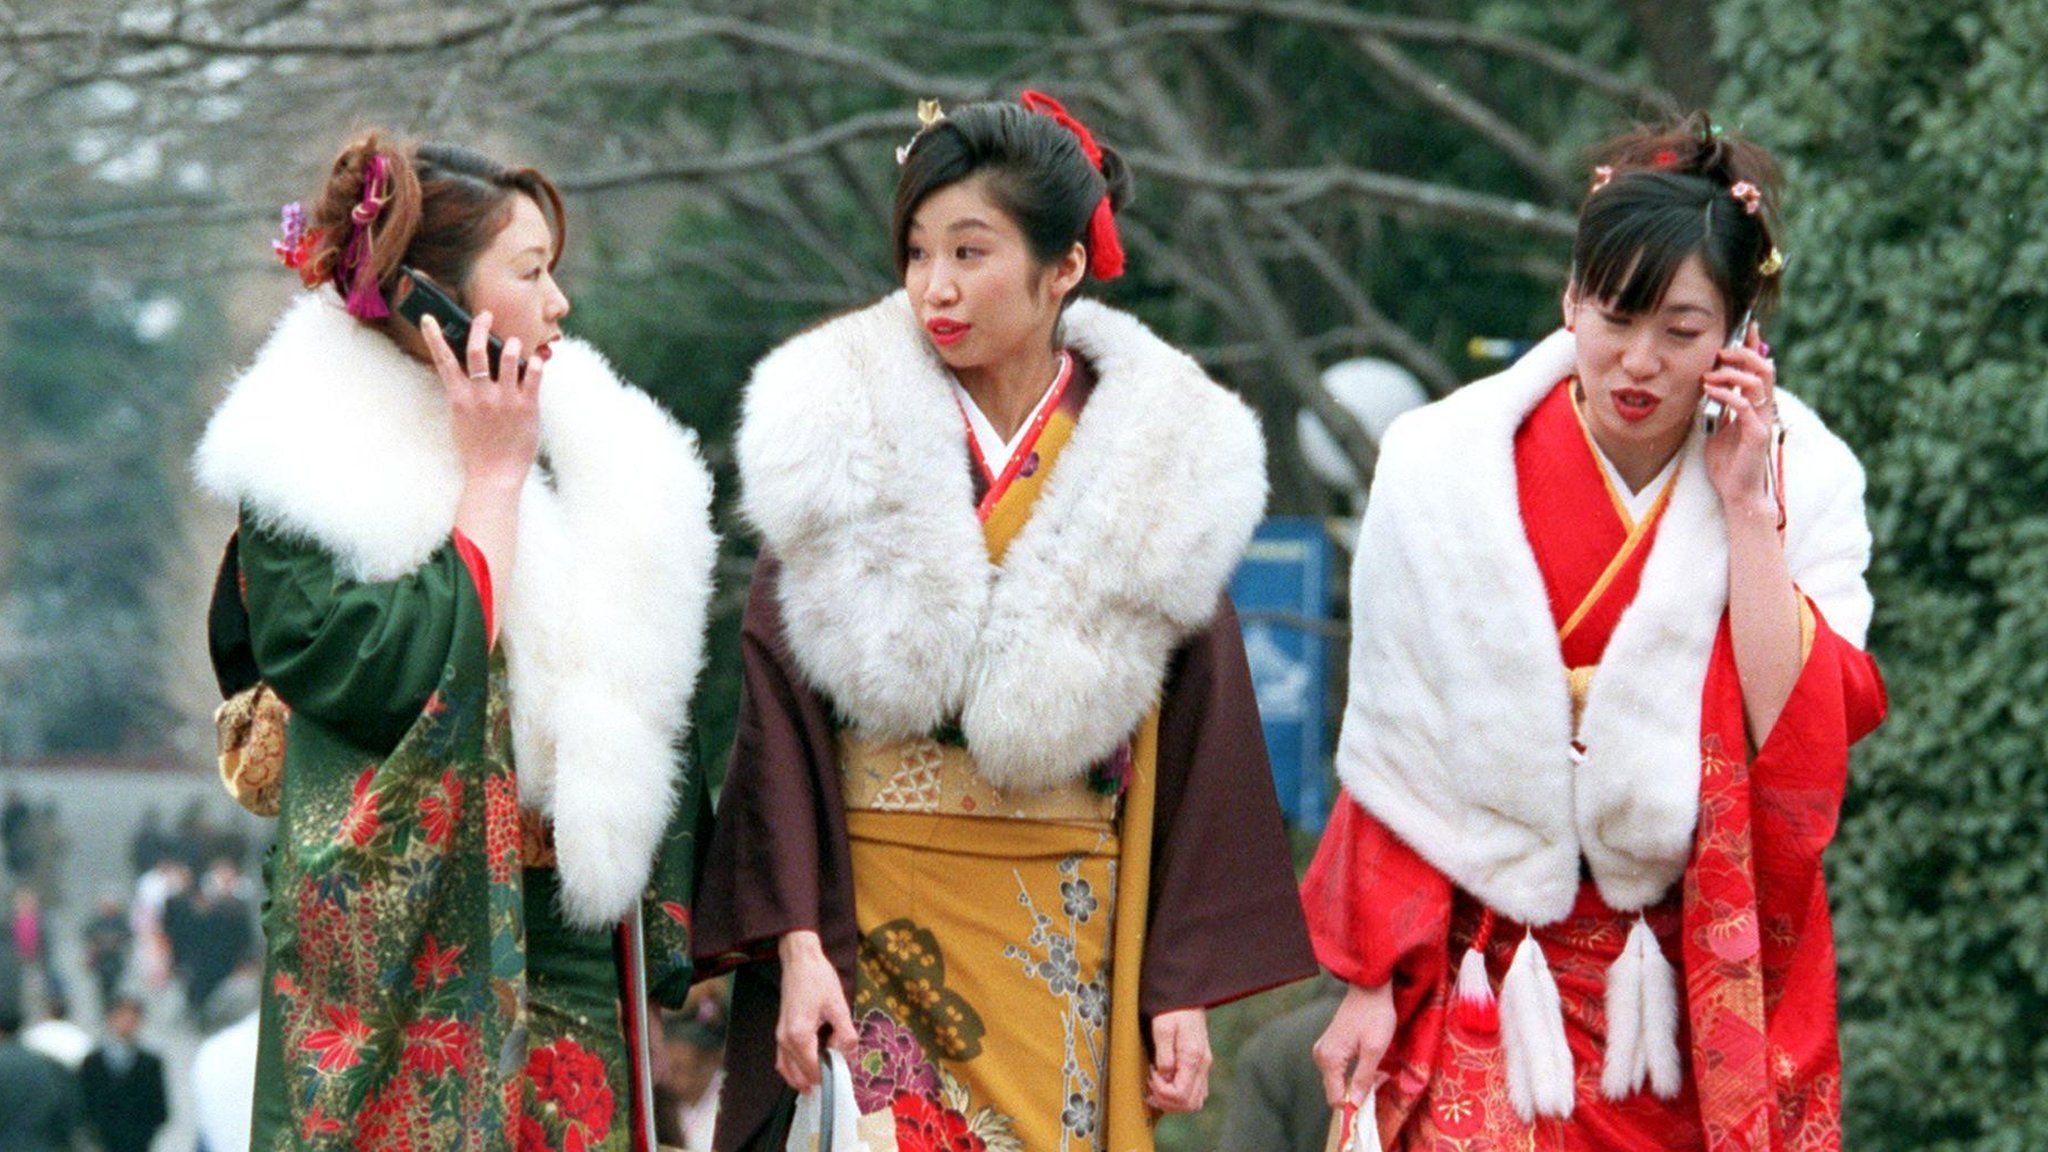 Three Japanese kimono-clad women make phone calls as they leave an annual coming-of-age ceremony